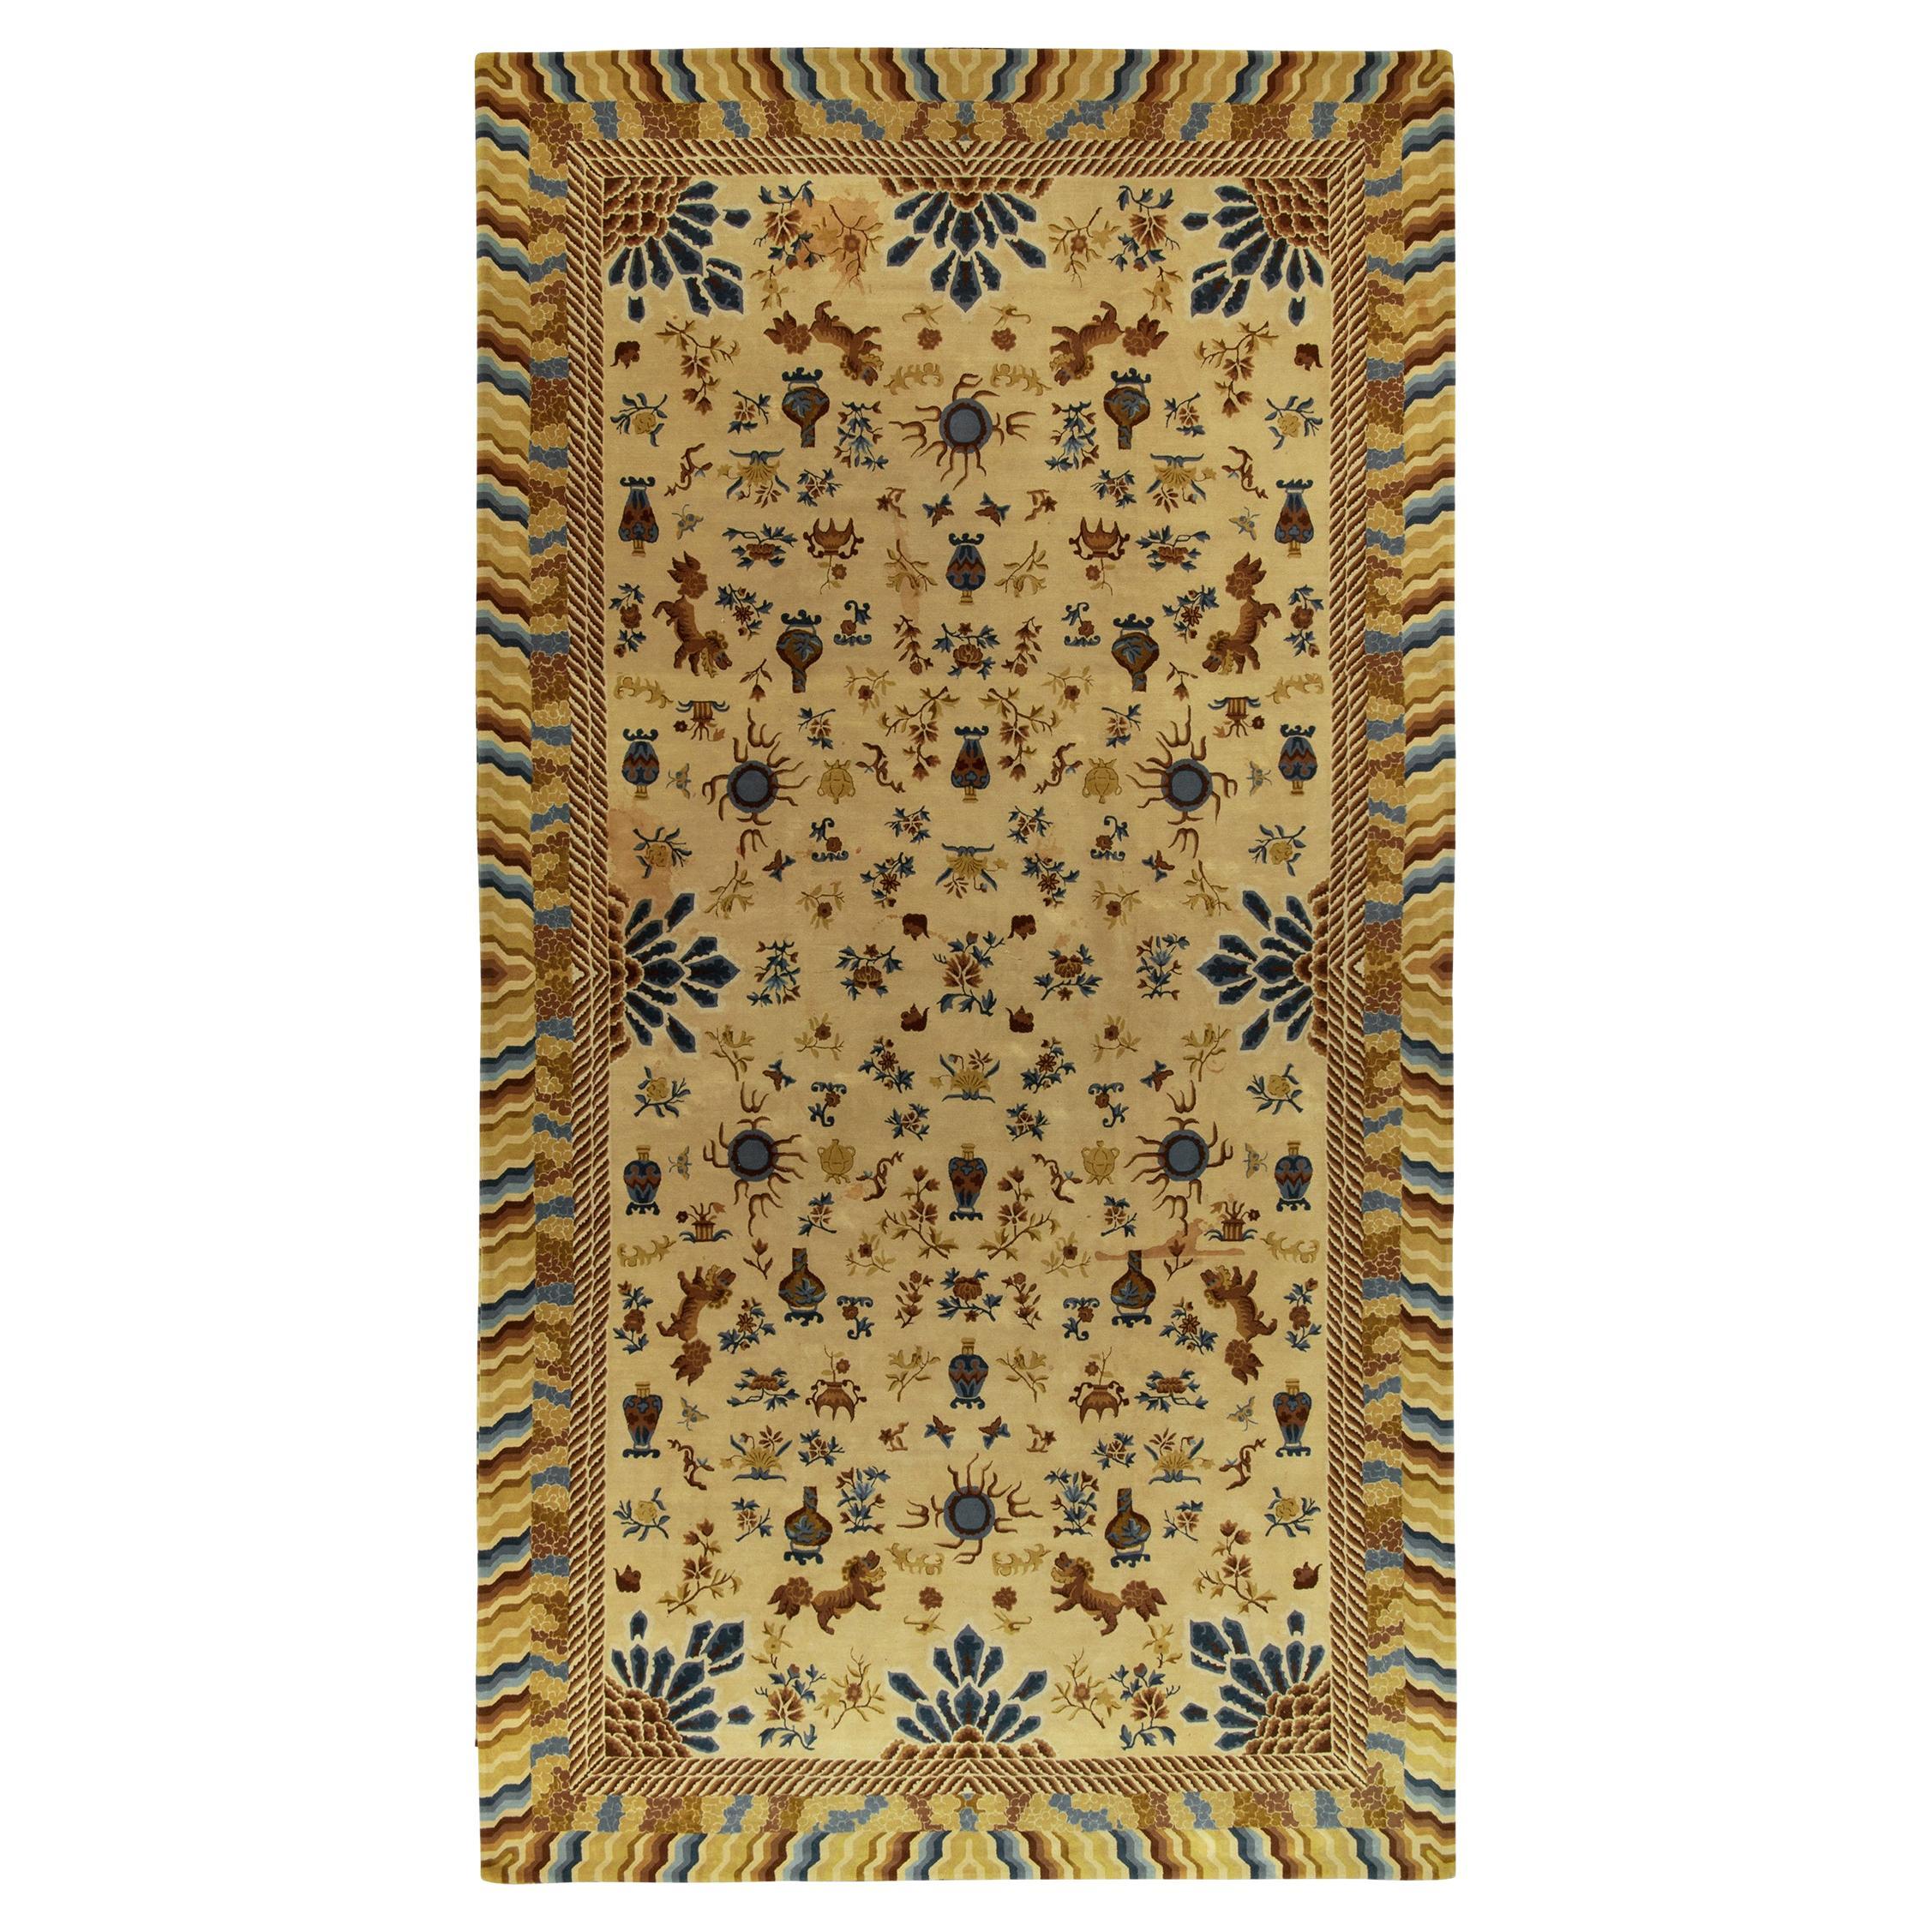 Antique Hooked Rug Gold, Blue & Beige Chinese Pictorial Style by Rug & Kilim For Sale